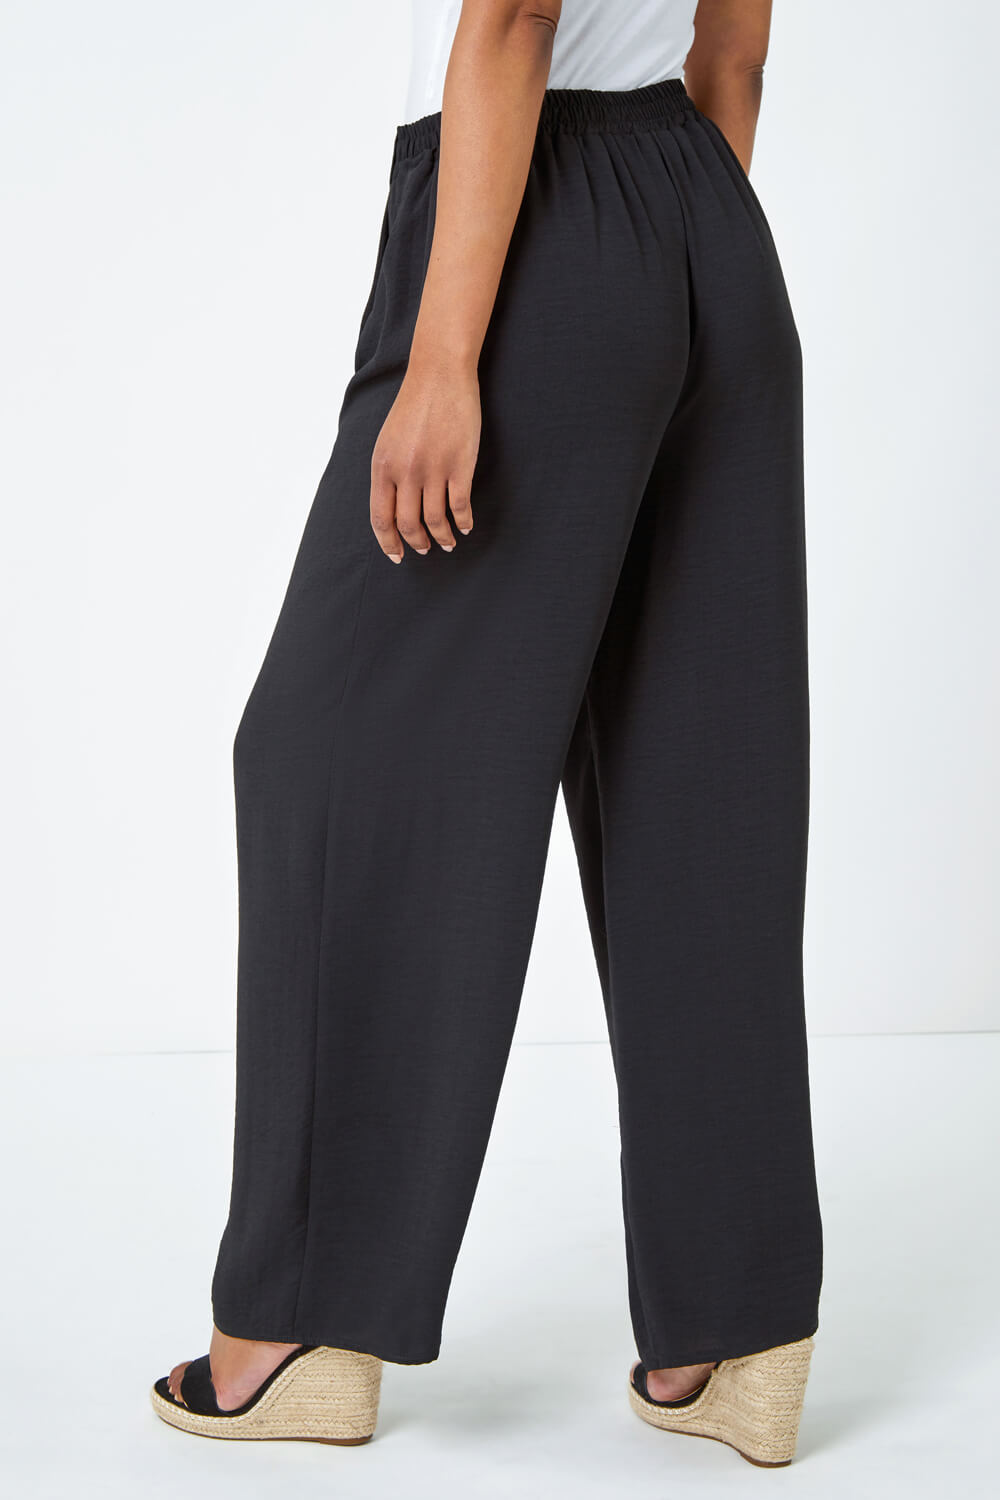 Black Petite Wide Leg Belted Trouser, Image 3 of 5